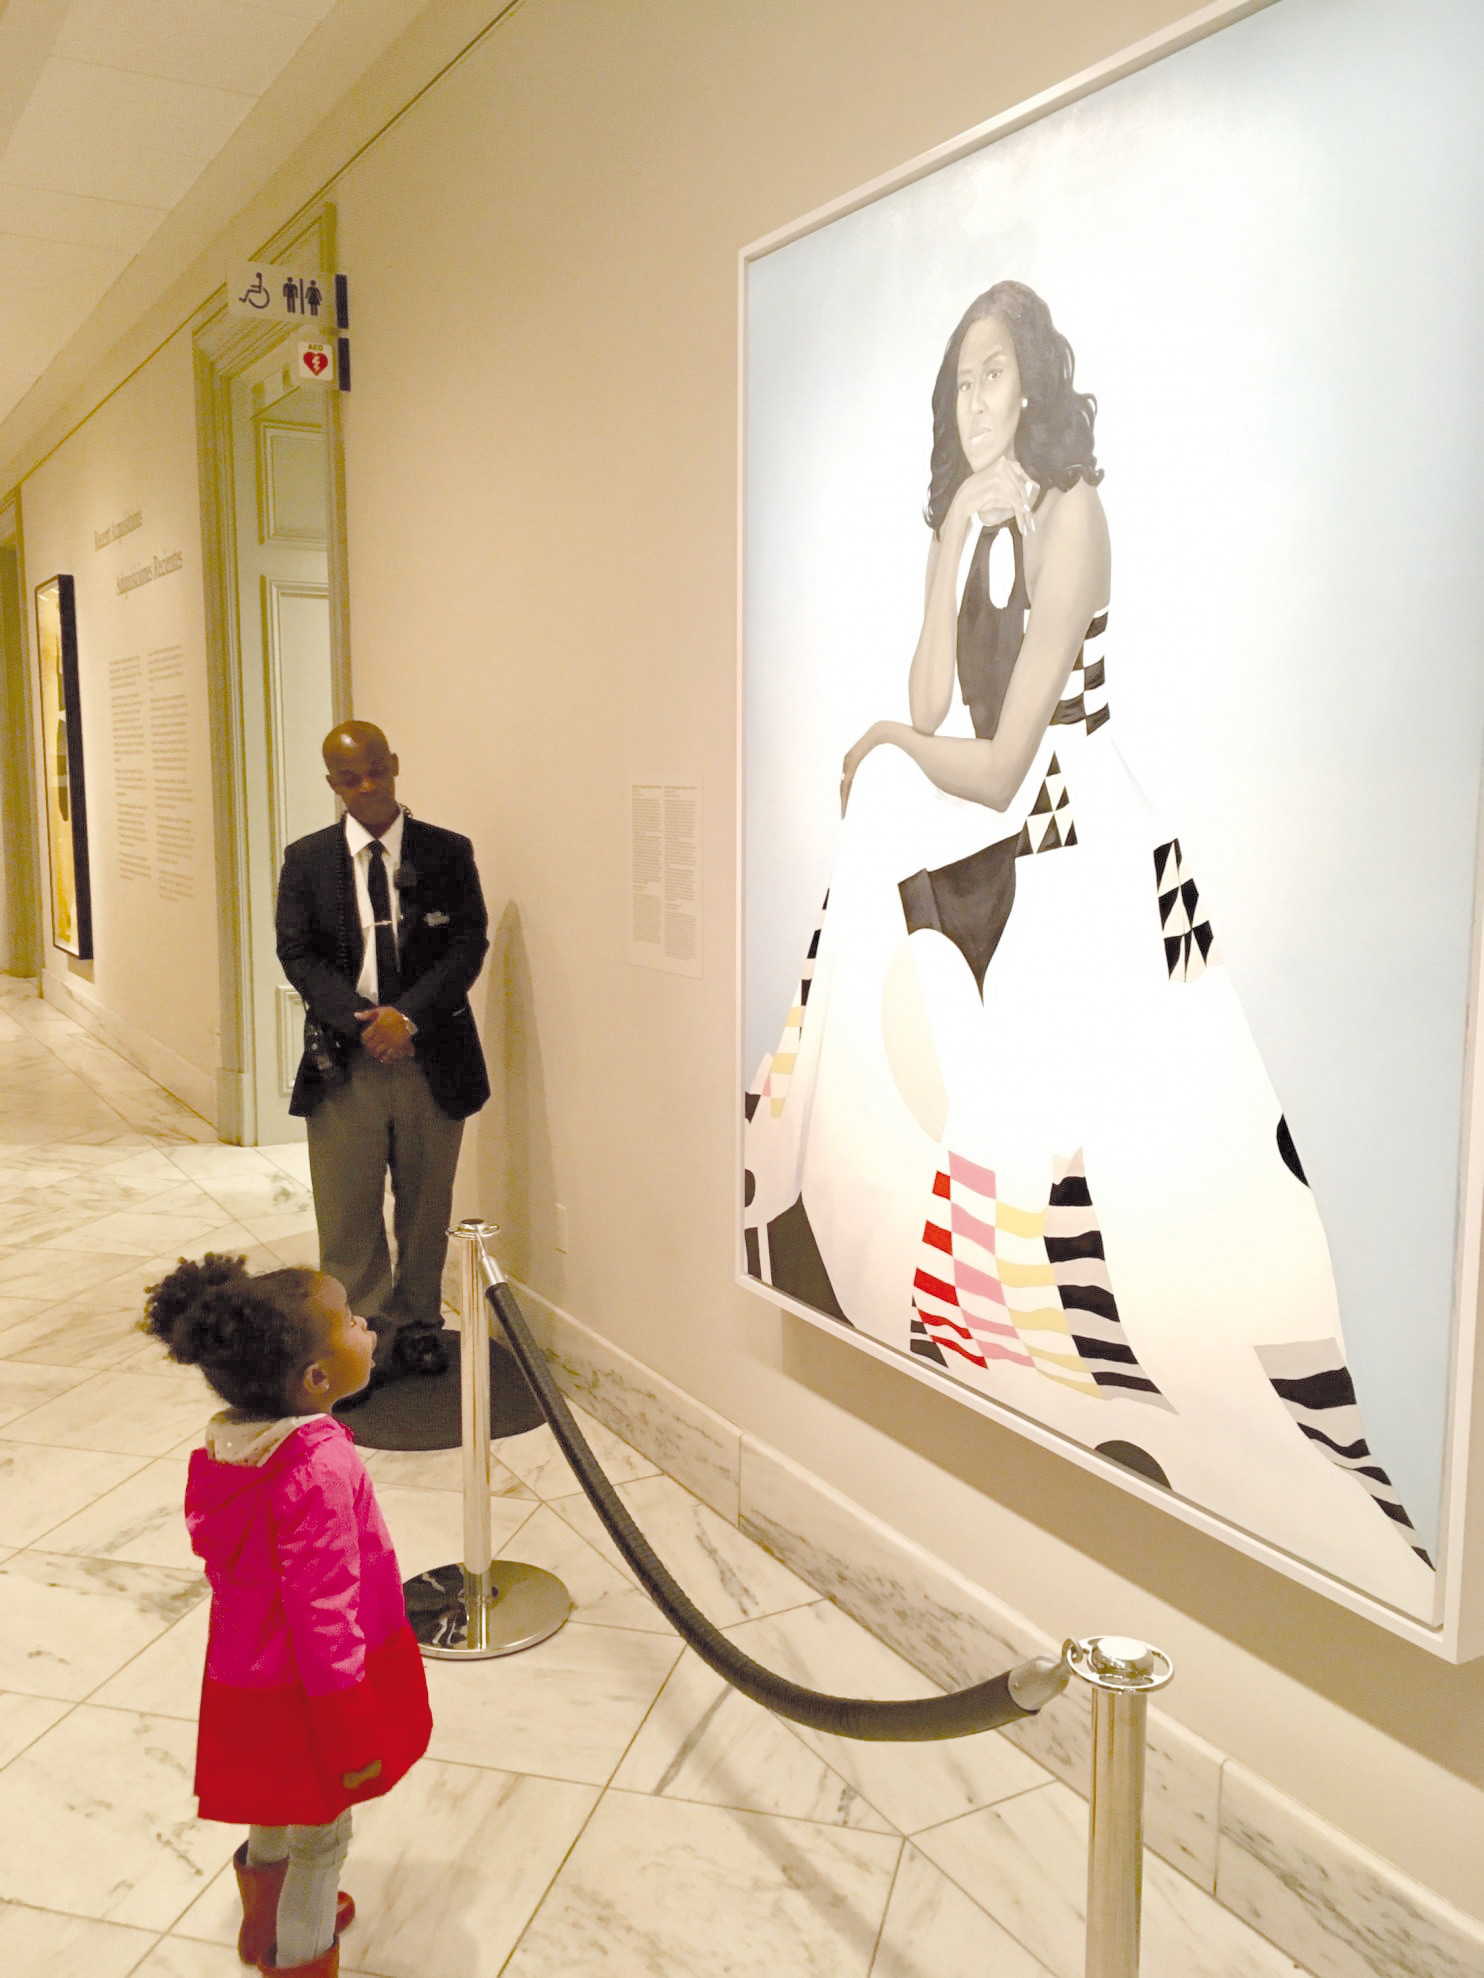 Parker Curry viewing portrait of Michelle Obama Image: Ben Hines